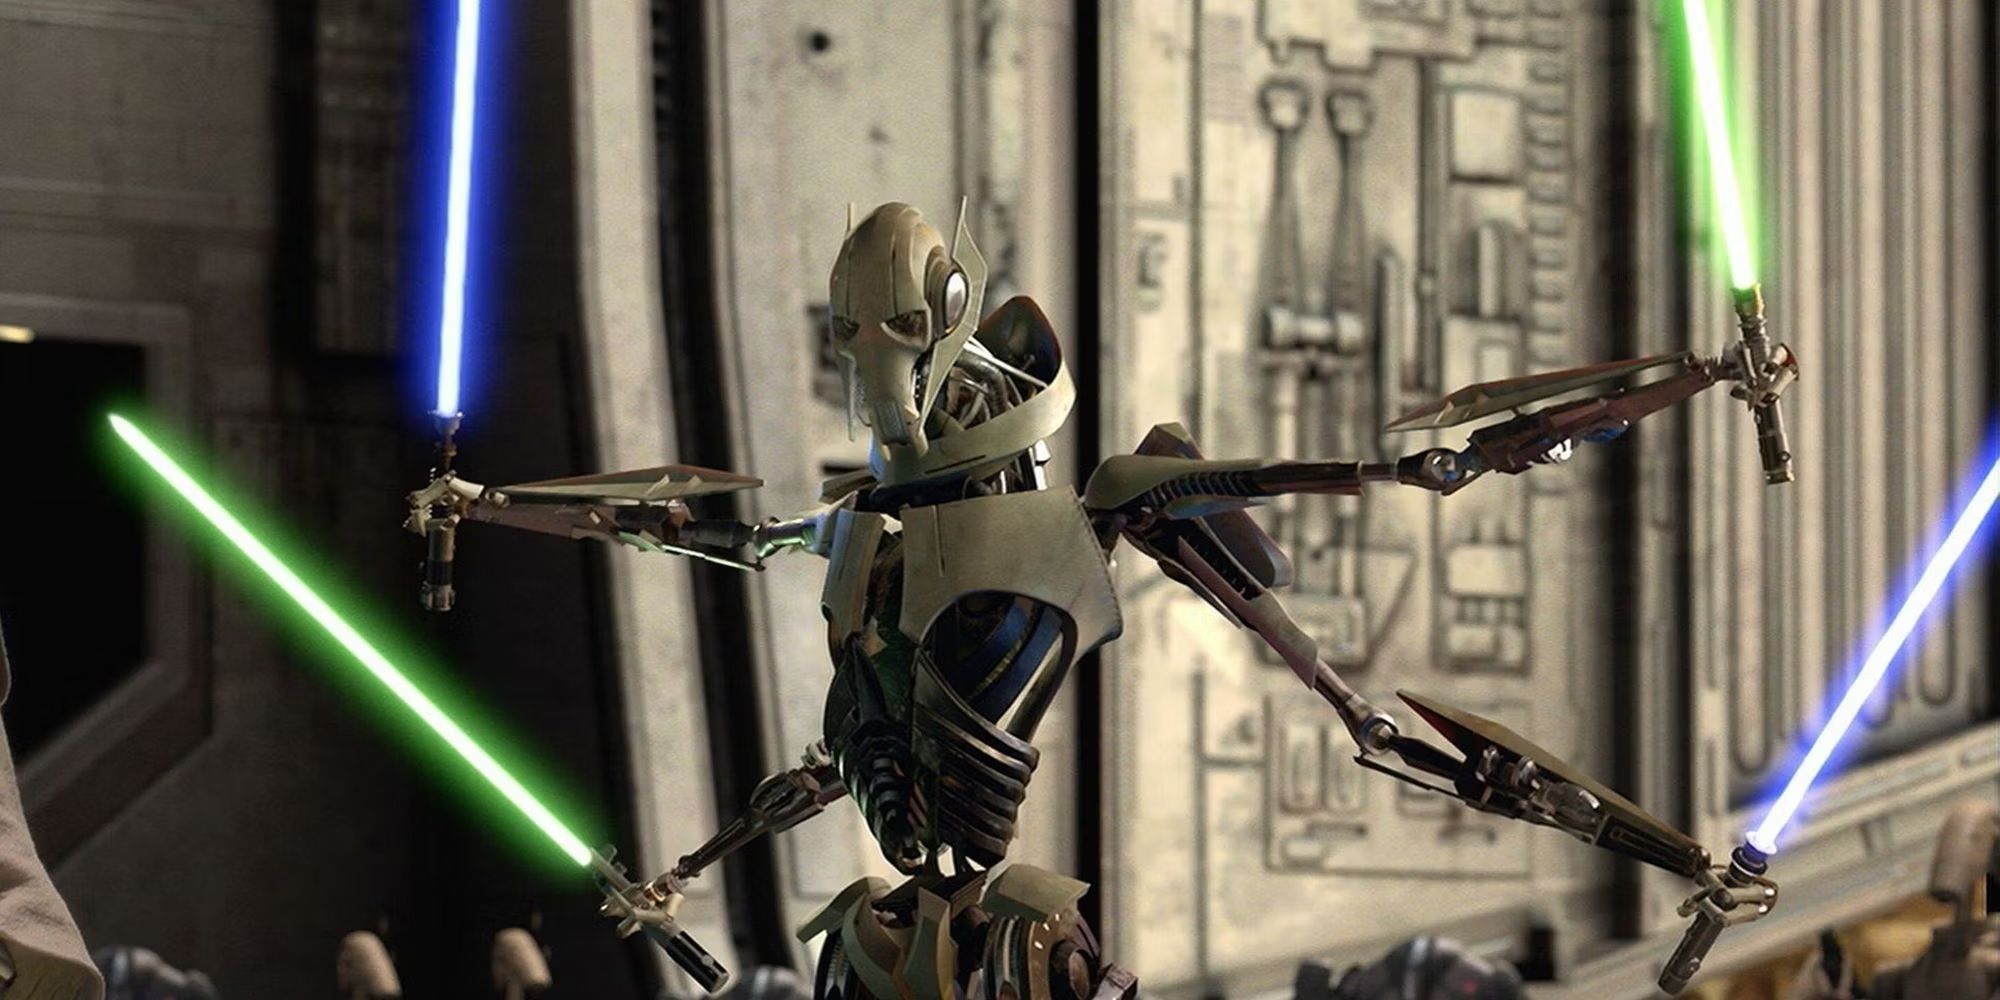 manga-star-wars-10-unpopular-opinions-about-general-grievous-according-to-reddit-mangahere